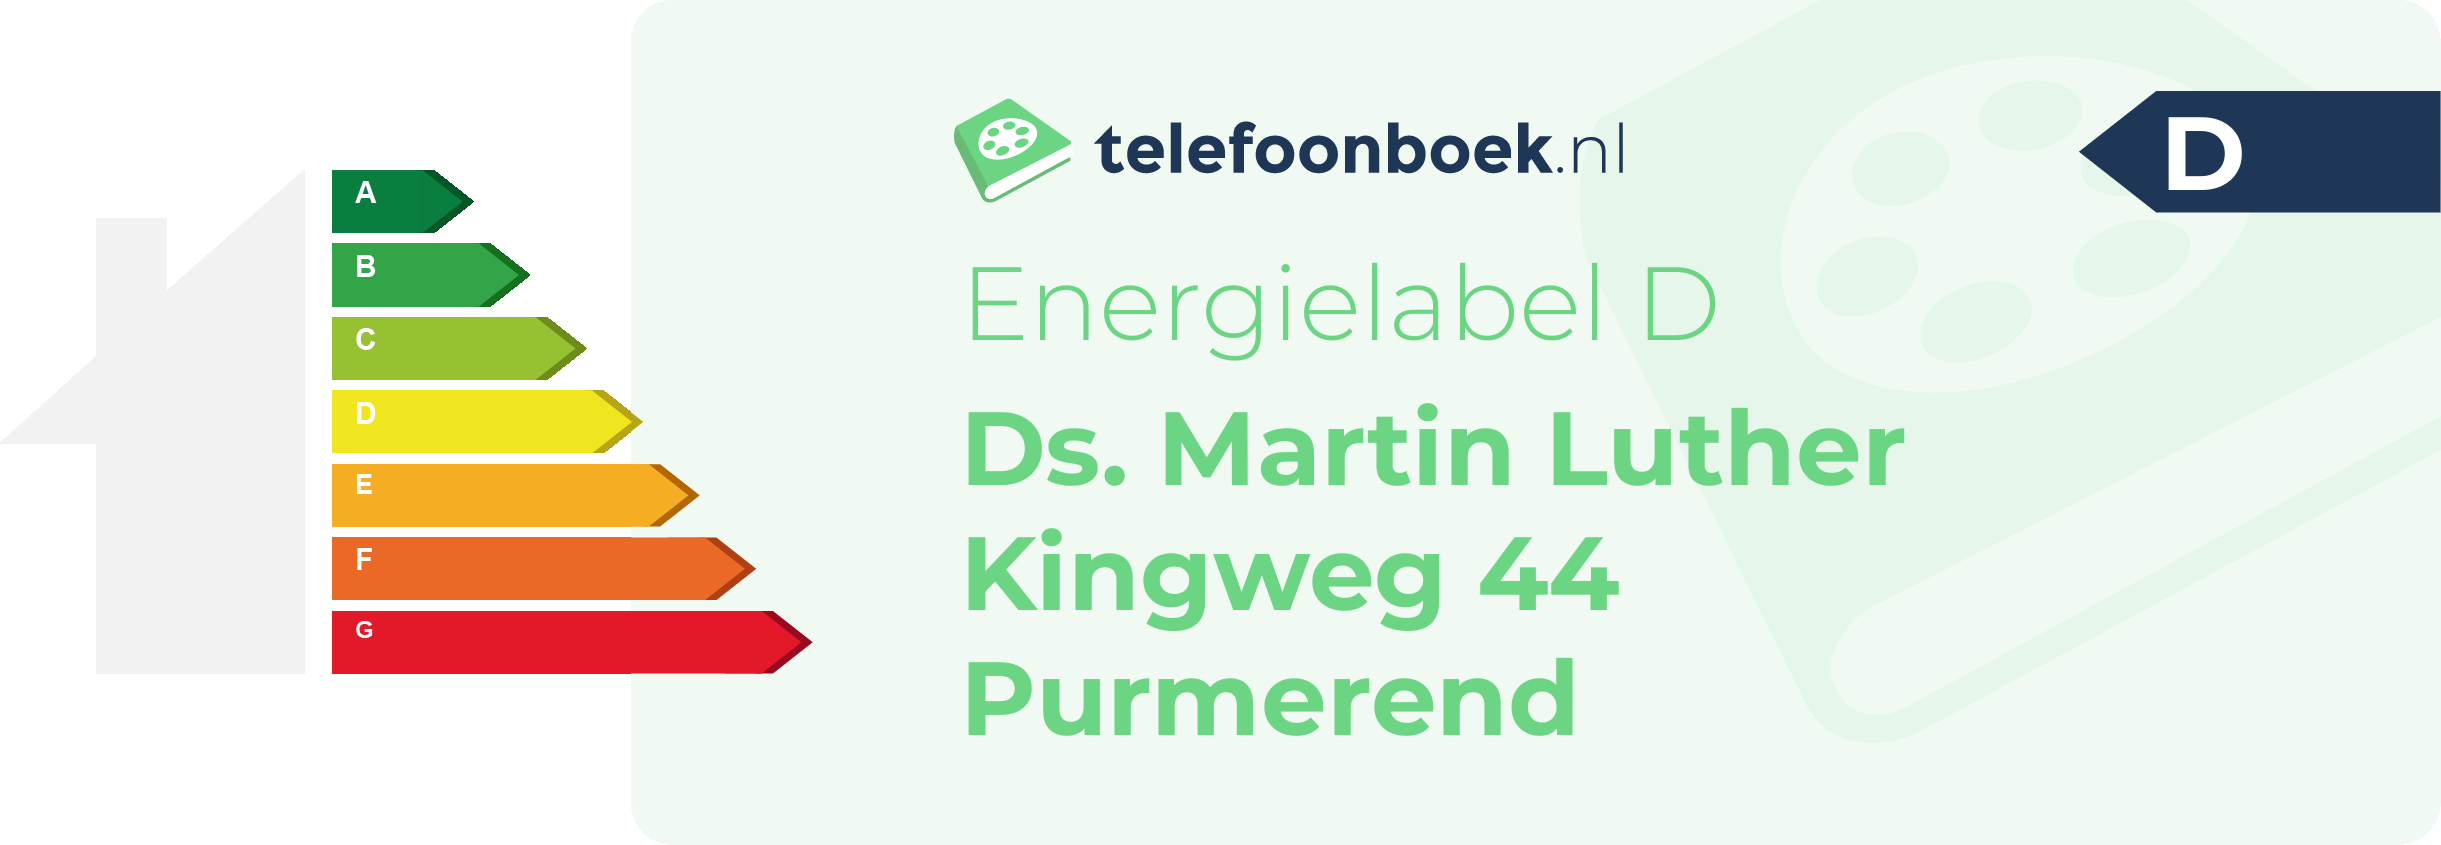 Energielabel Ds. Martin Luther Kingweg 44 Purmerend